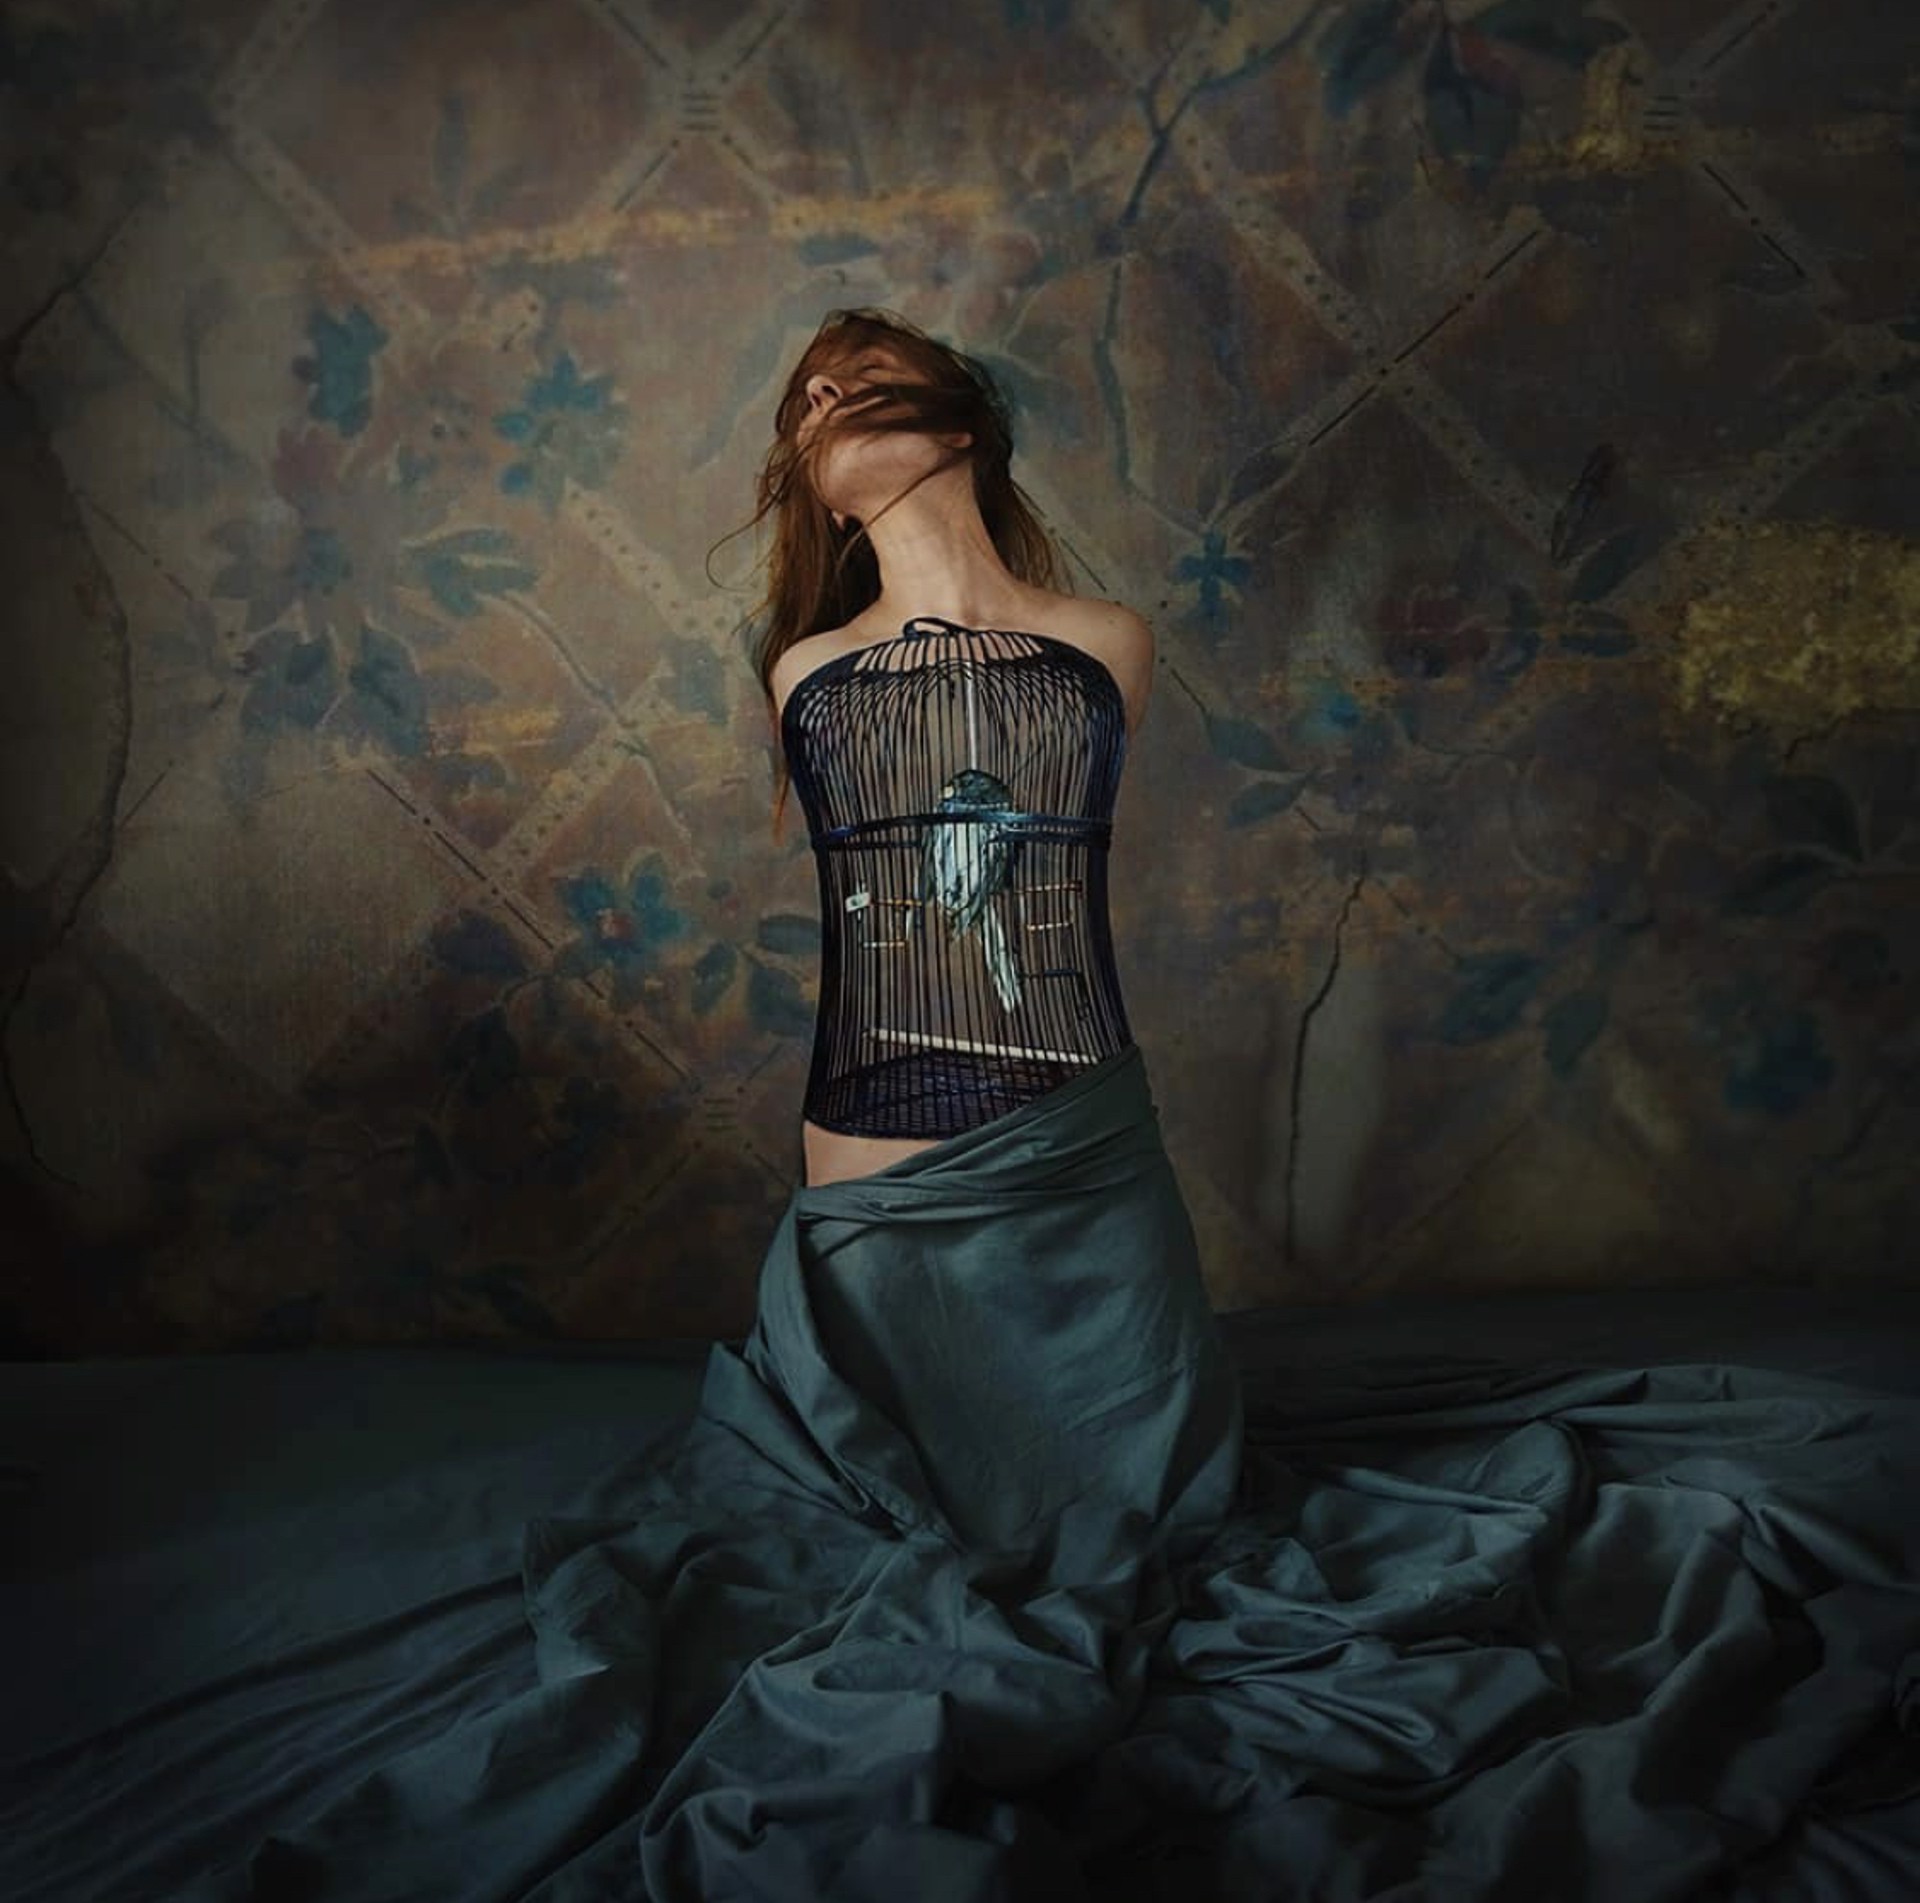 The Caged Bird by Brooke Shaden